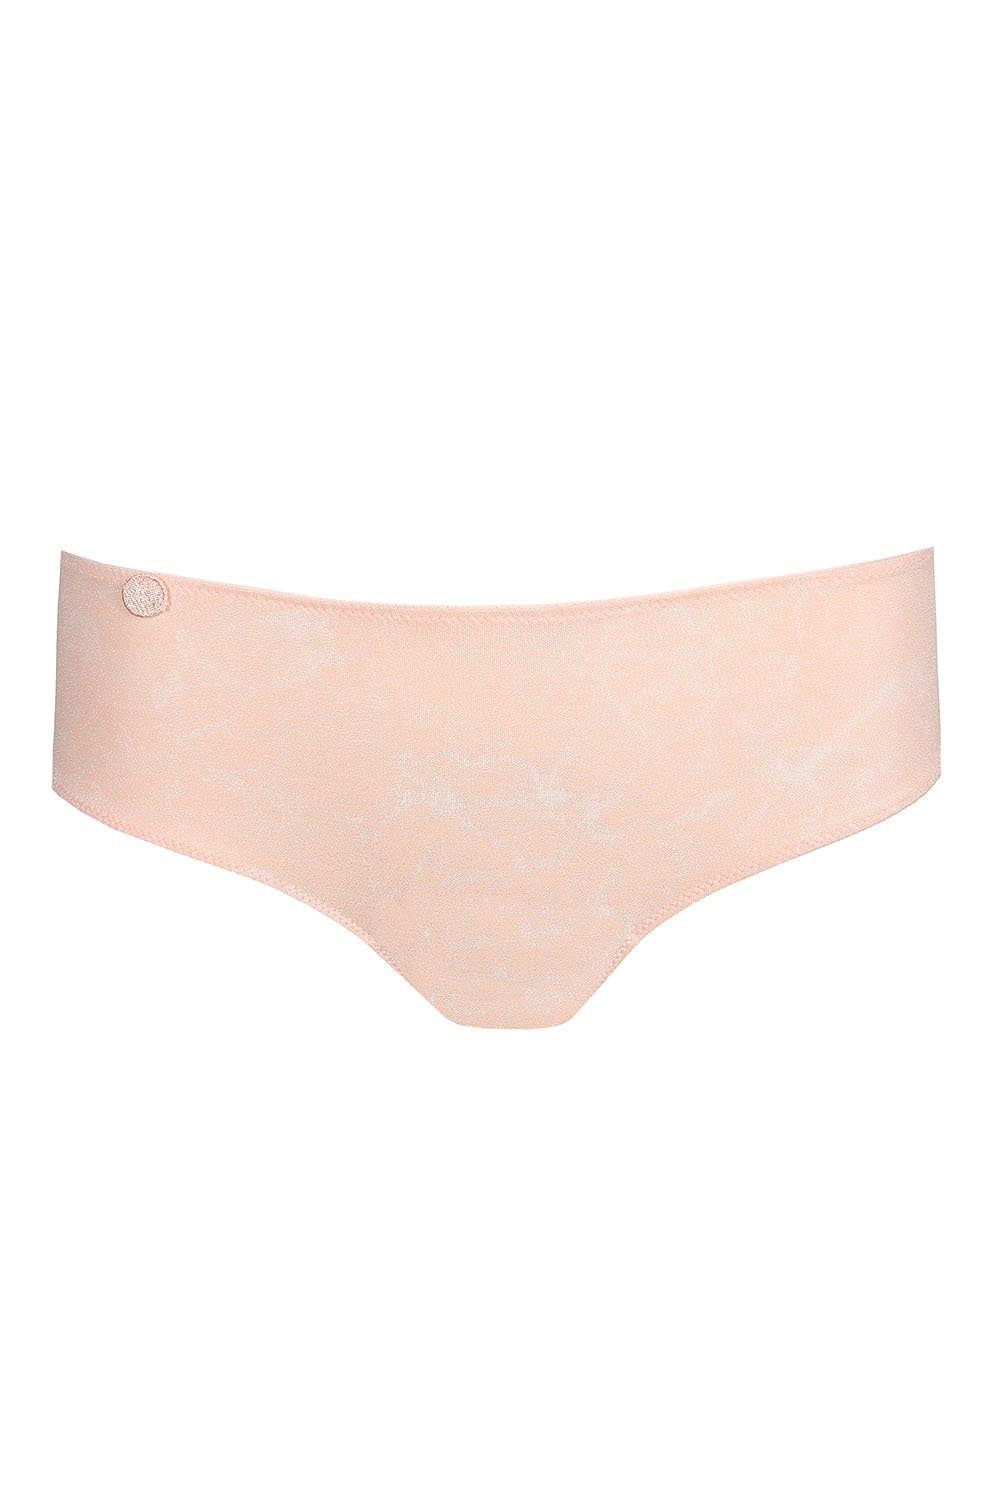 Marie Jo Hipster Hotpants 0520822 crystal pink